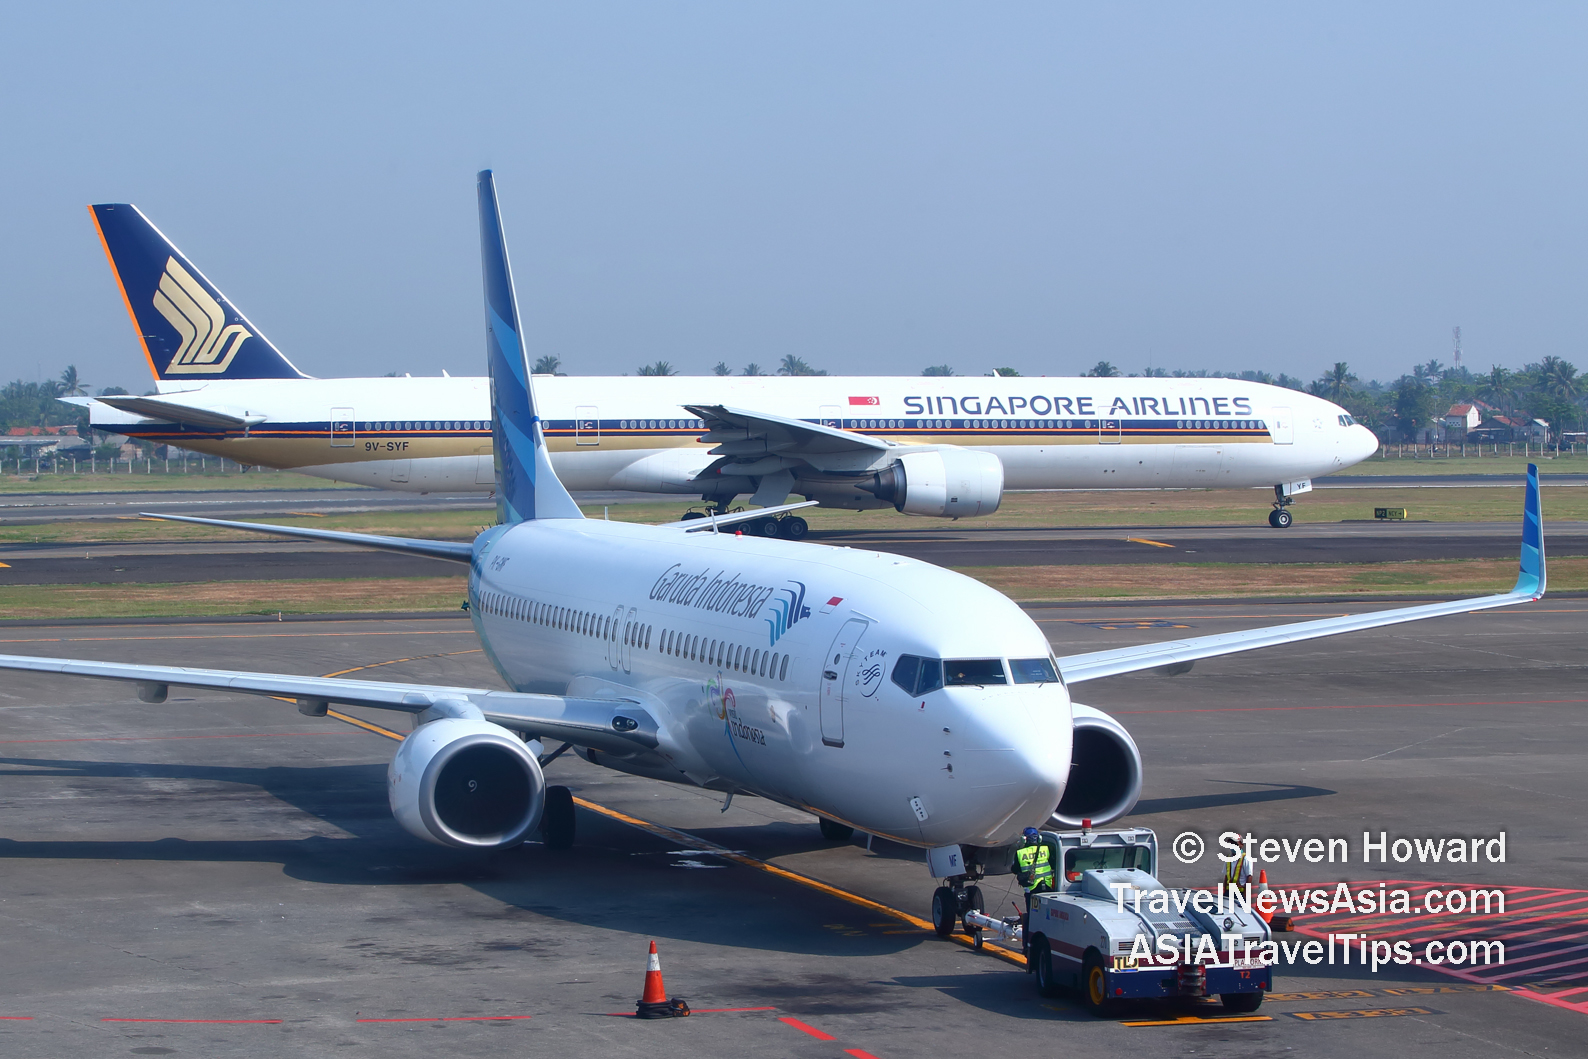 Garuda Indonesia and Singapore Airlines at Jakarta Airport. Picture by Steven Howard of TravelNewsAsia.com Click to enlarge.